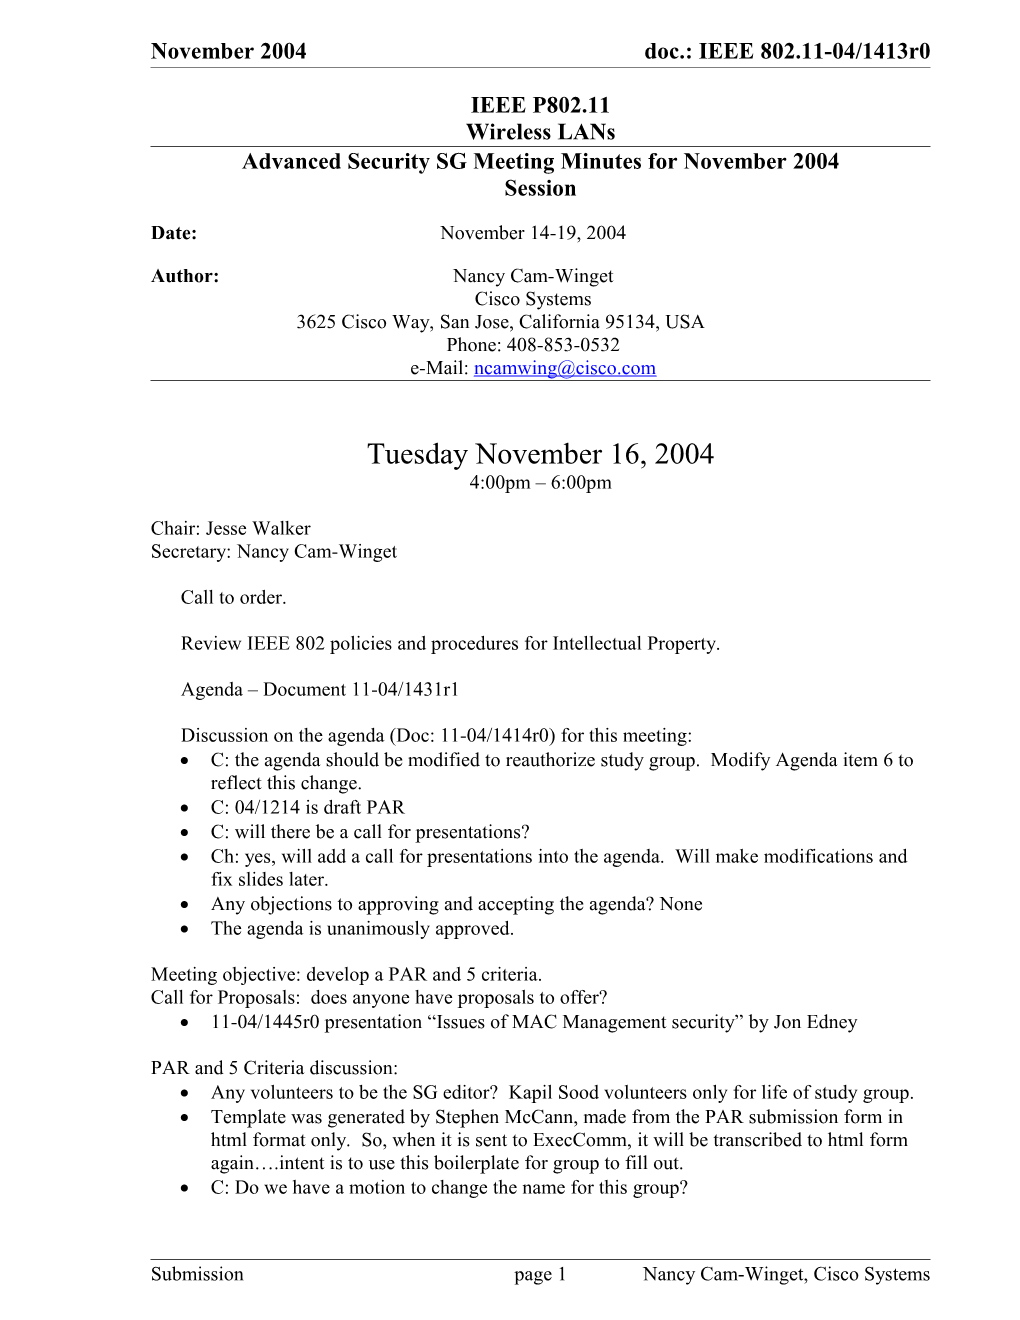 Advanced Security SG Meeting Minutes for November 2004 Session